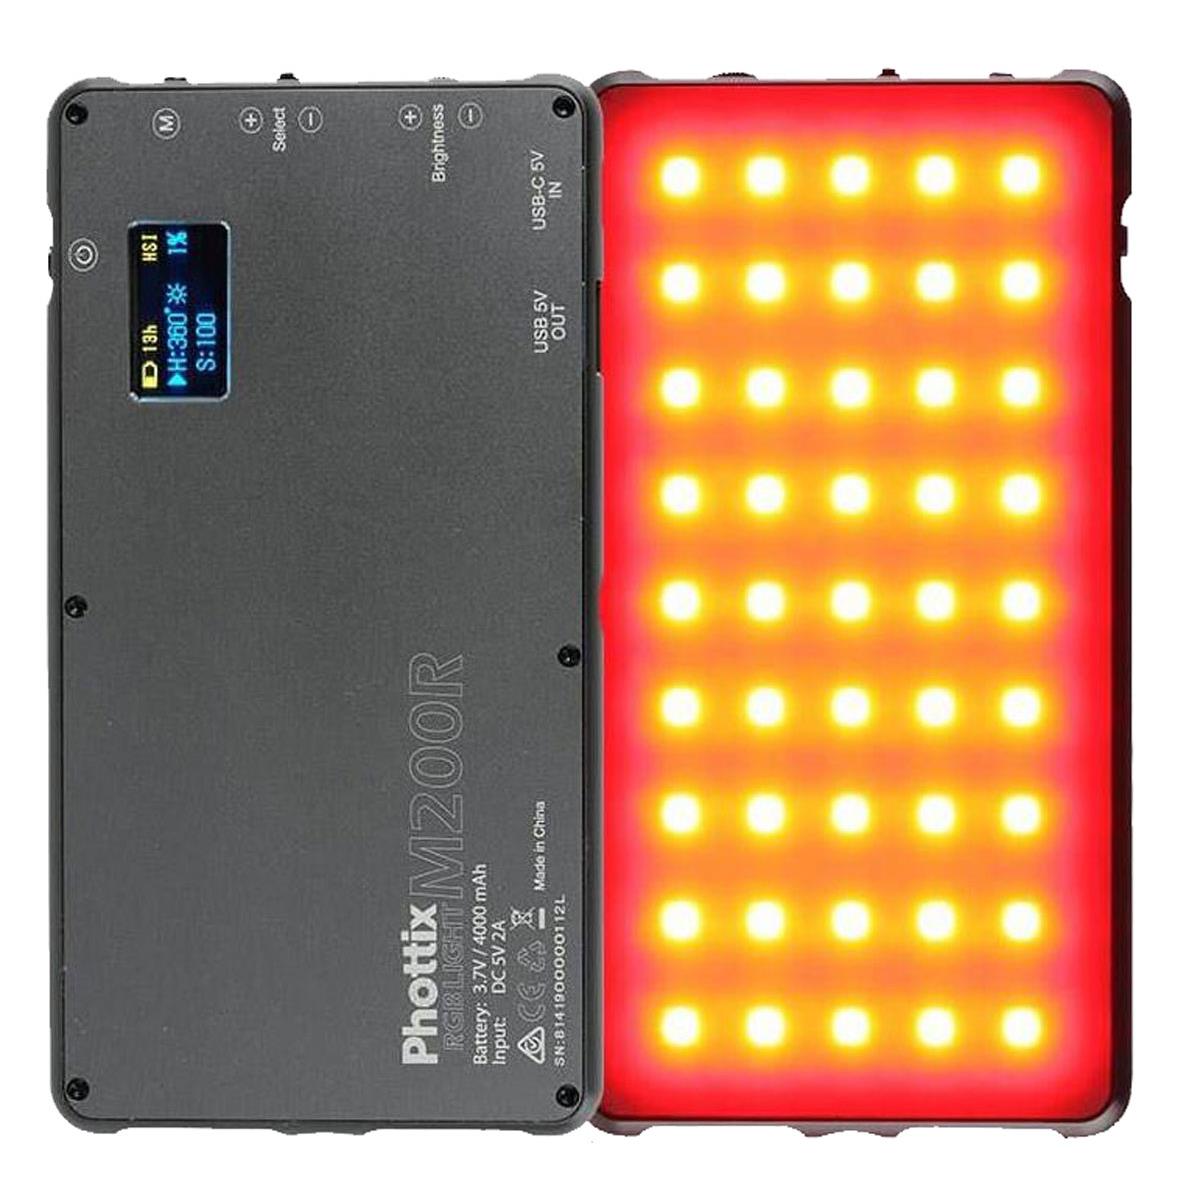 Image of Phottix M200R LED RGB Light with Effects for Mobile Phones